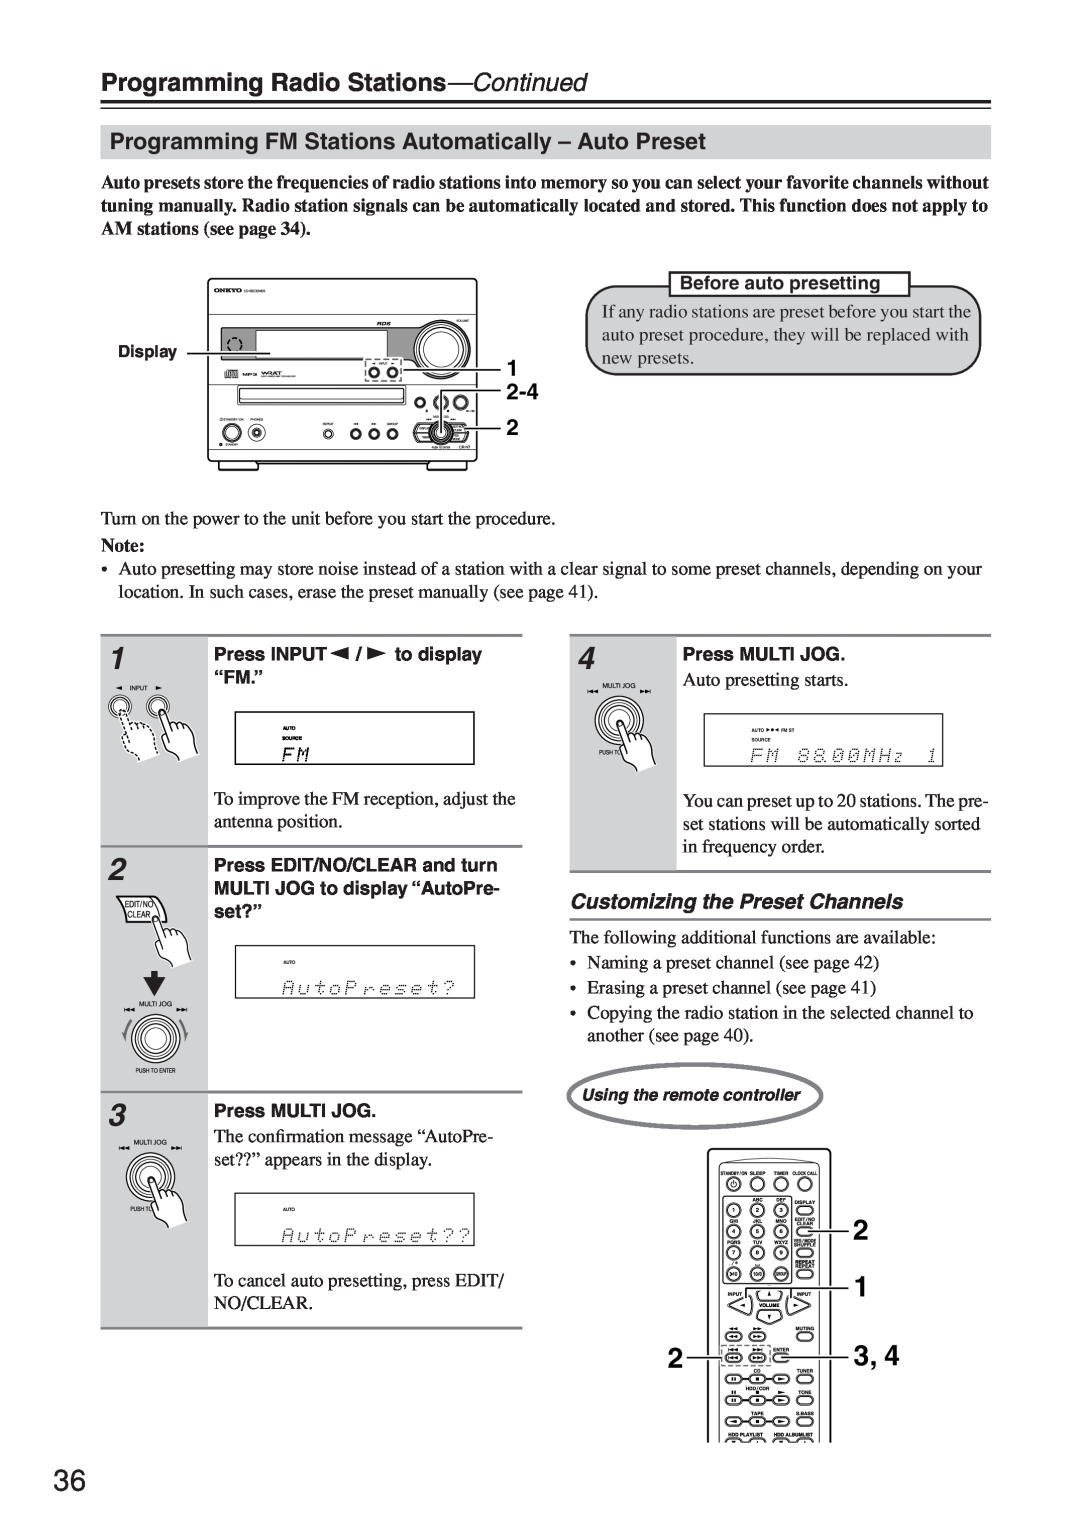 Onkyo CR-N7 instruction manual 2-4, 1 2, Programming Radio Stations-Continued, Customizing the Preset Channels 